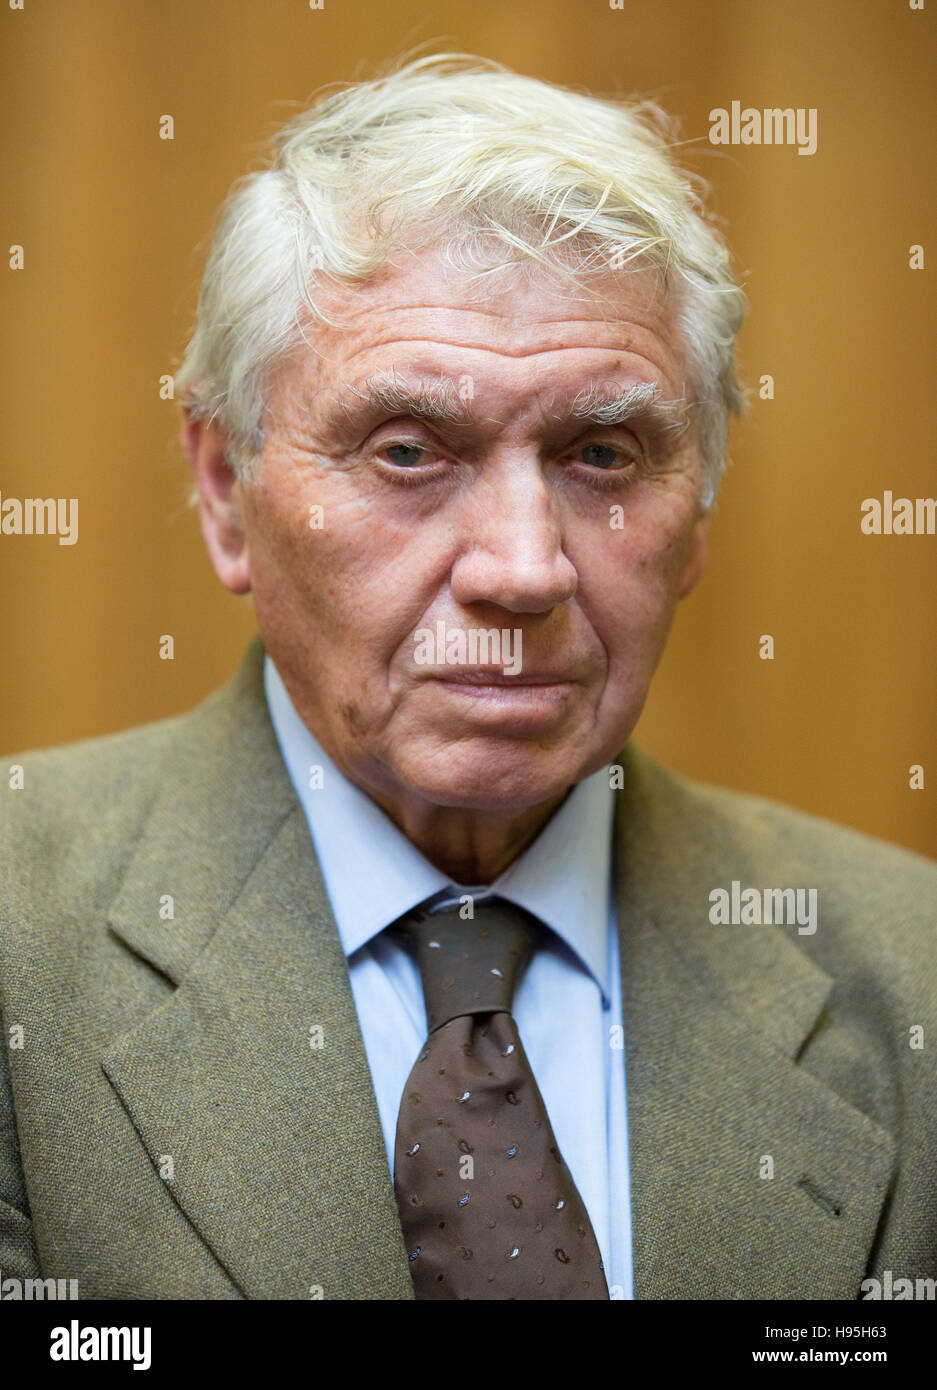 Legendary photographer,Don McCullin,in London to judge photography competition. Stock Photo